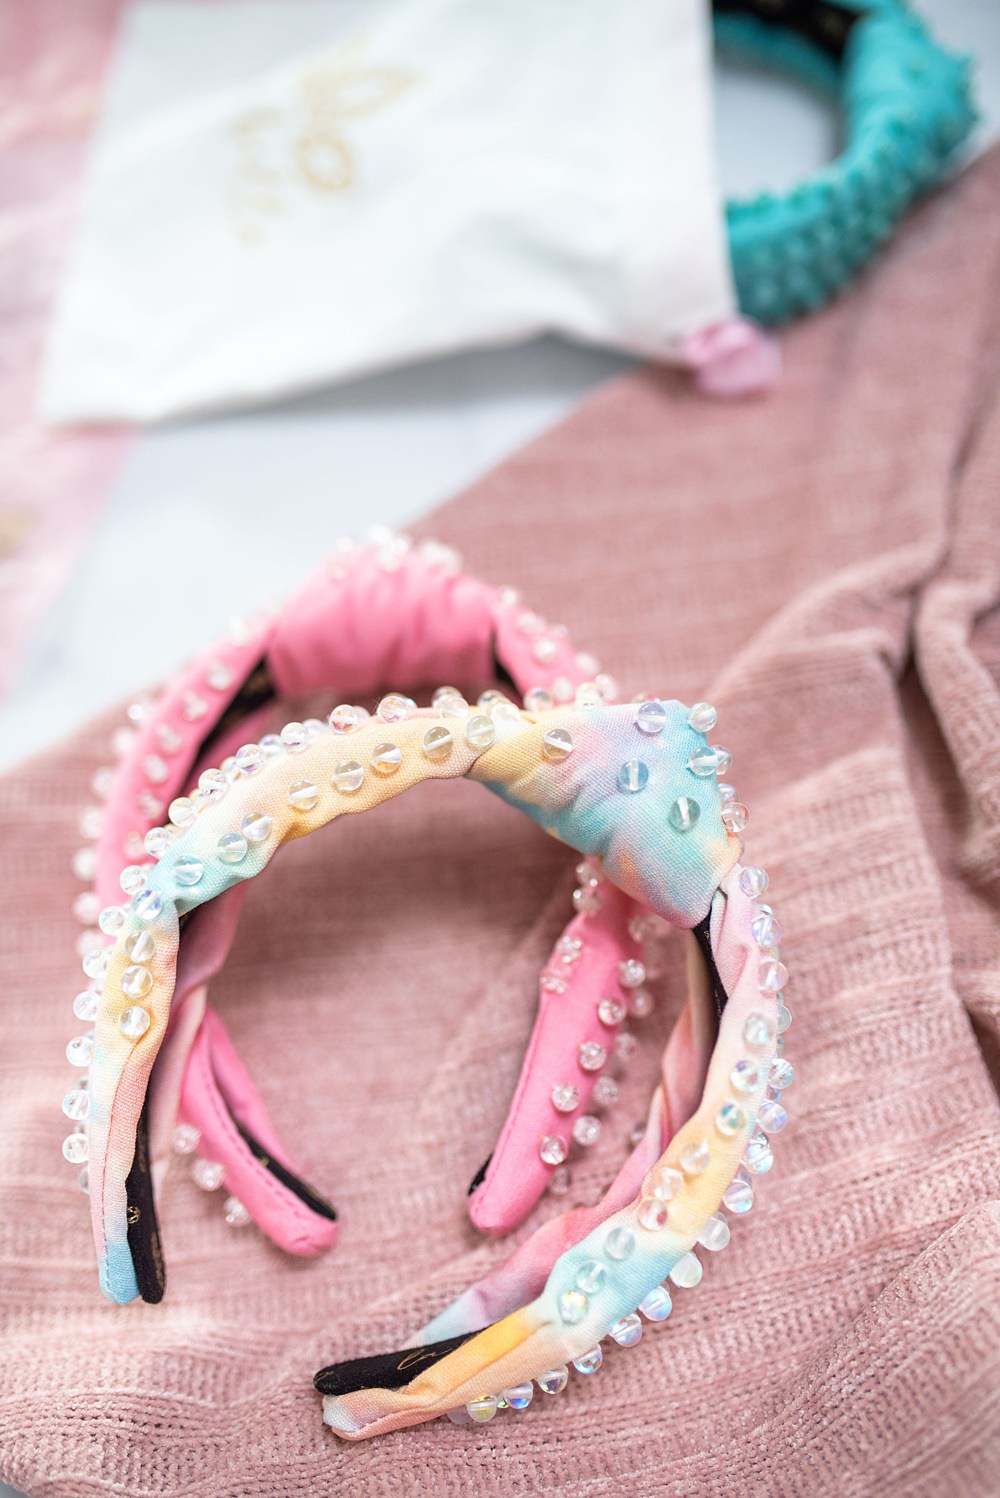 Two pretty pink headbands with small silver decors. There's a blue headband behind.